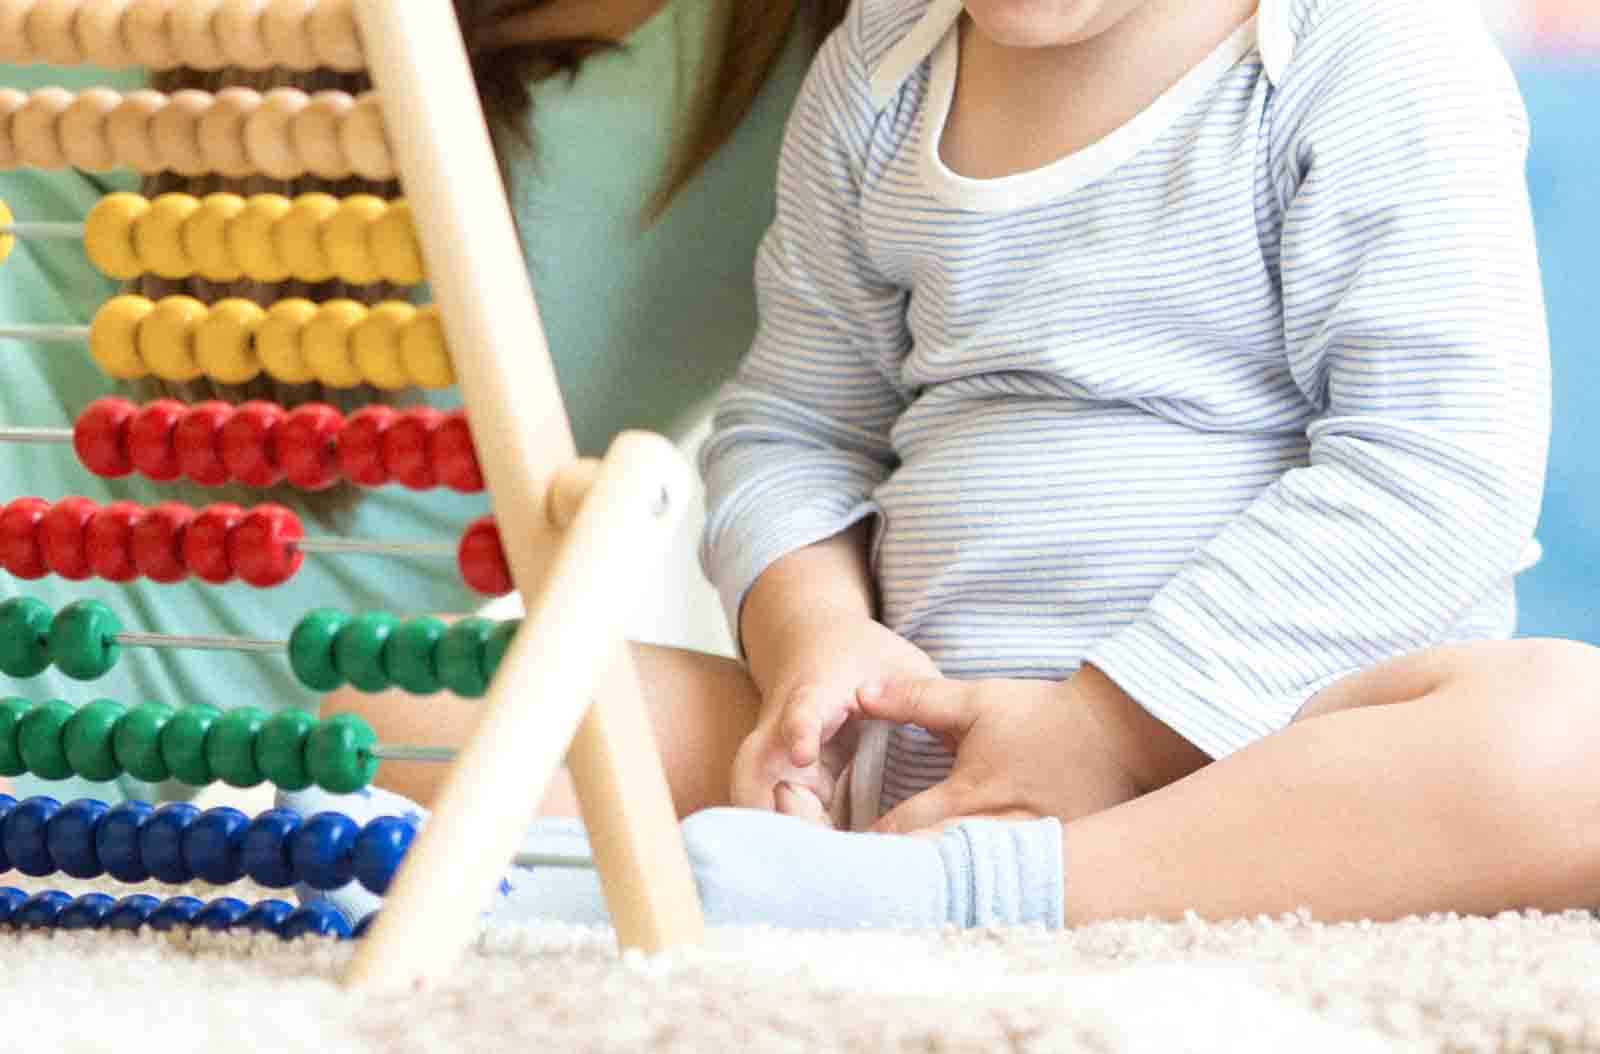 Early Childhood Education Encouraging Math Skills for Kids Begins with Baby